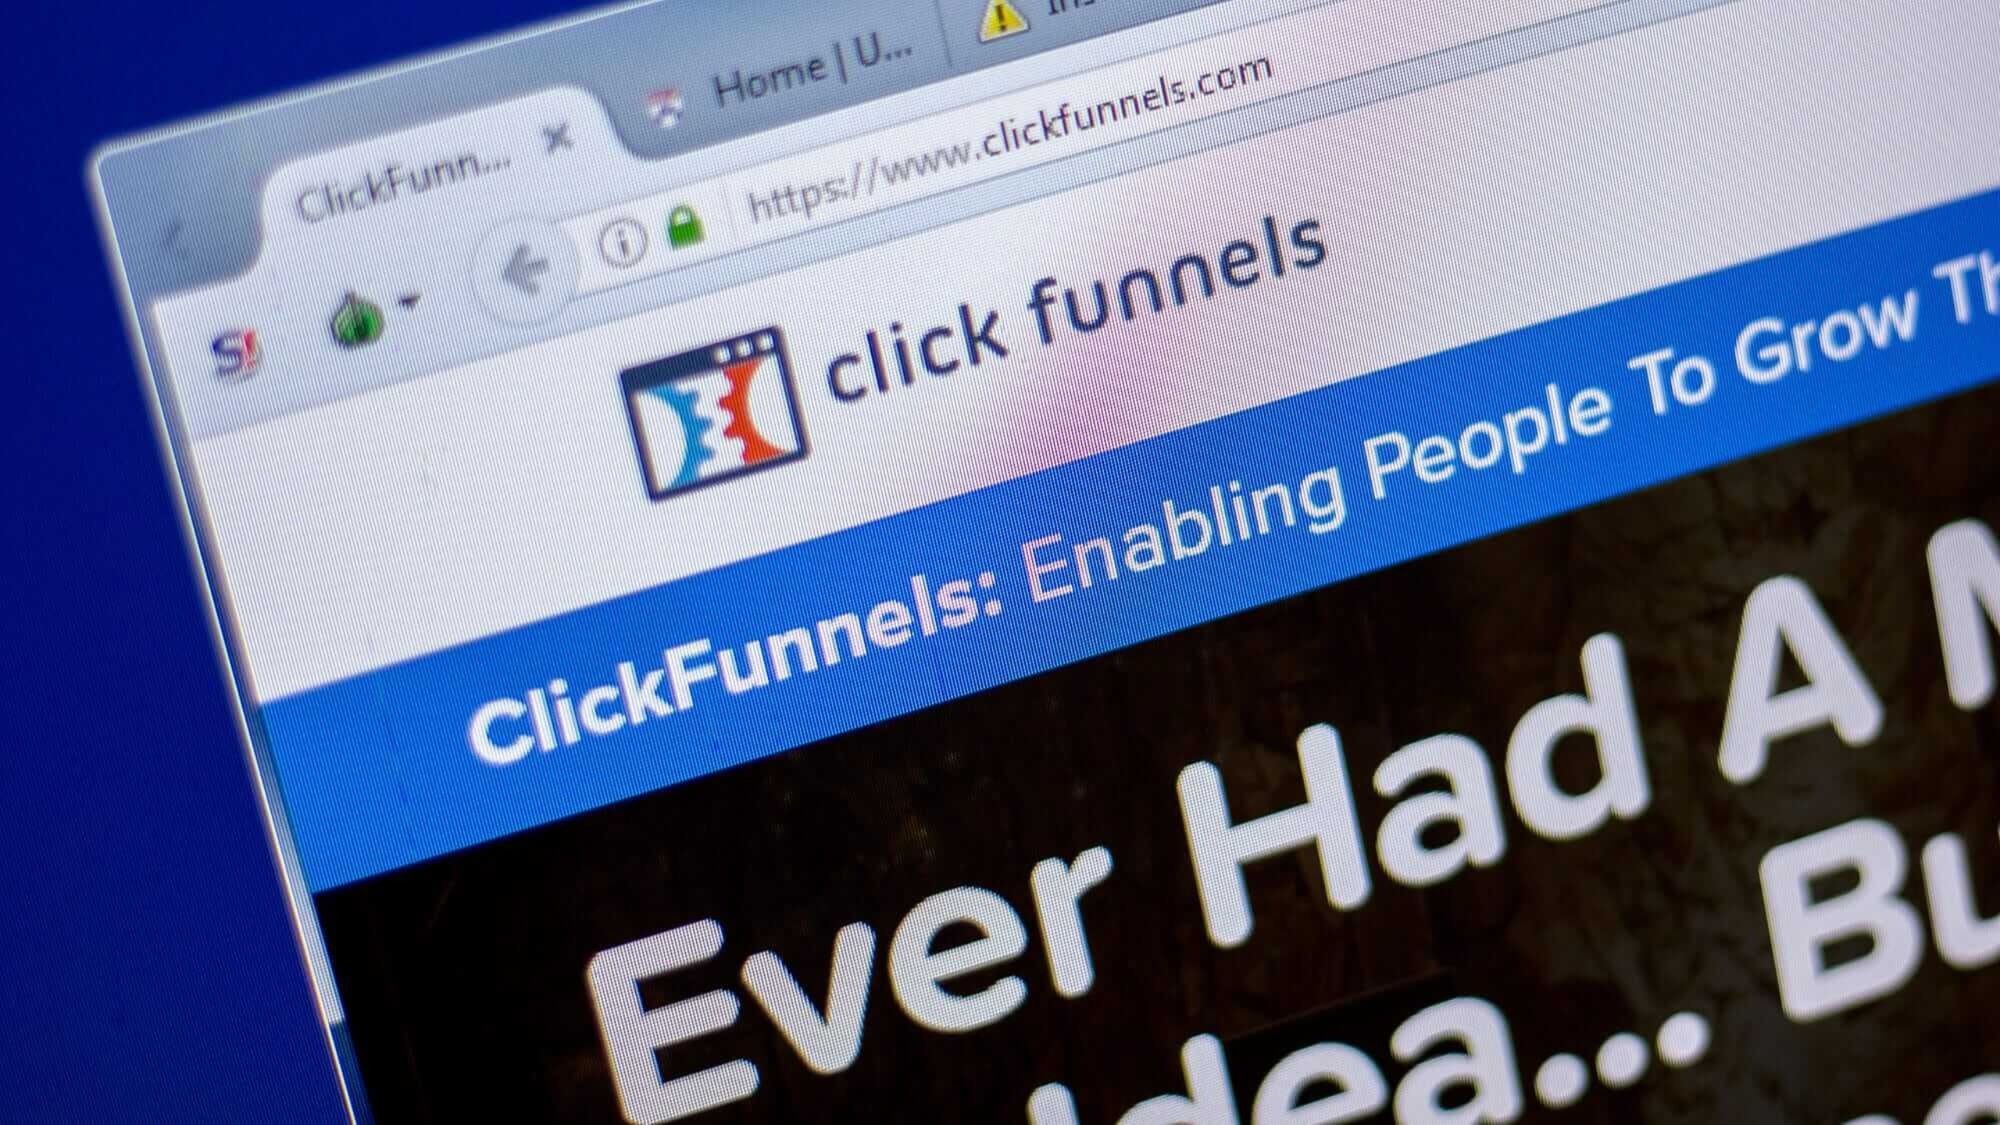 How To Make Front Page Clickfunnels - Truths